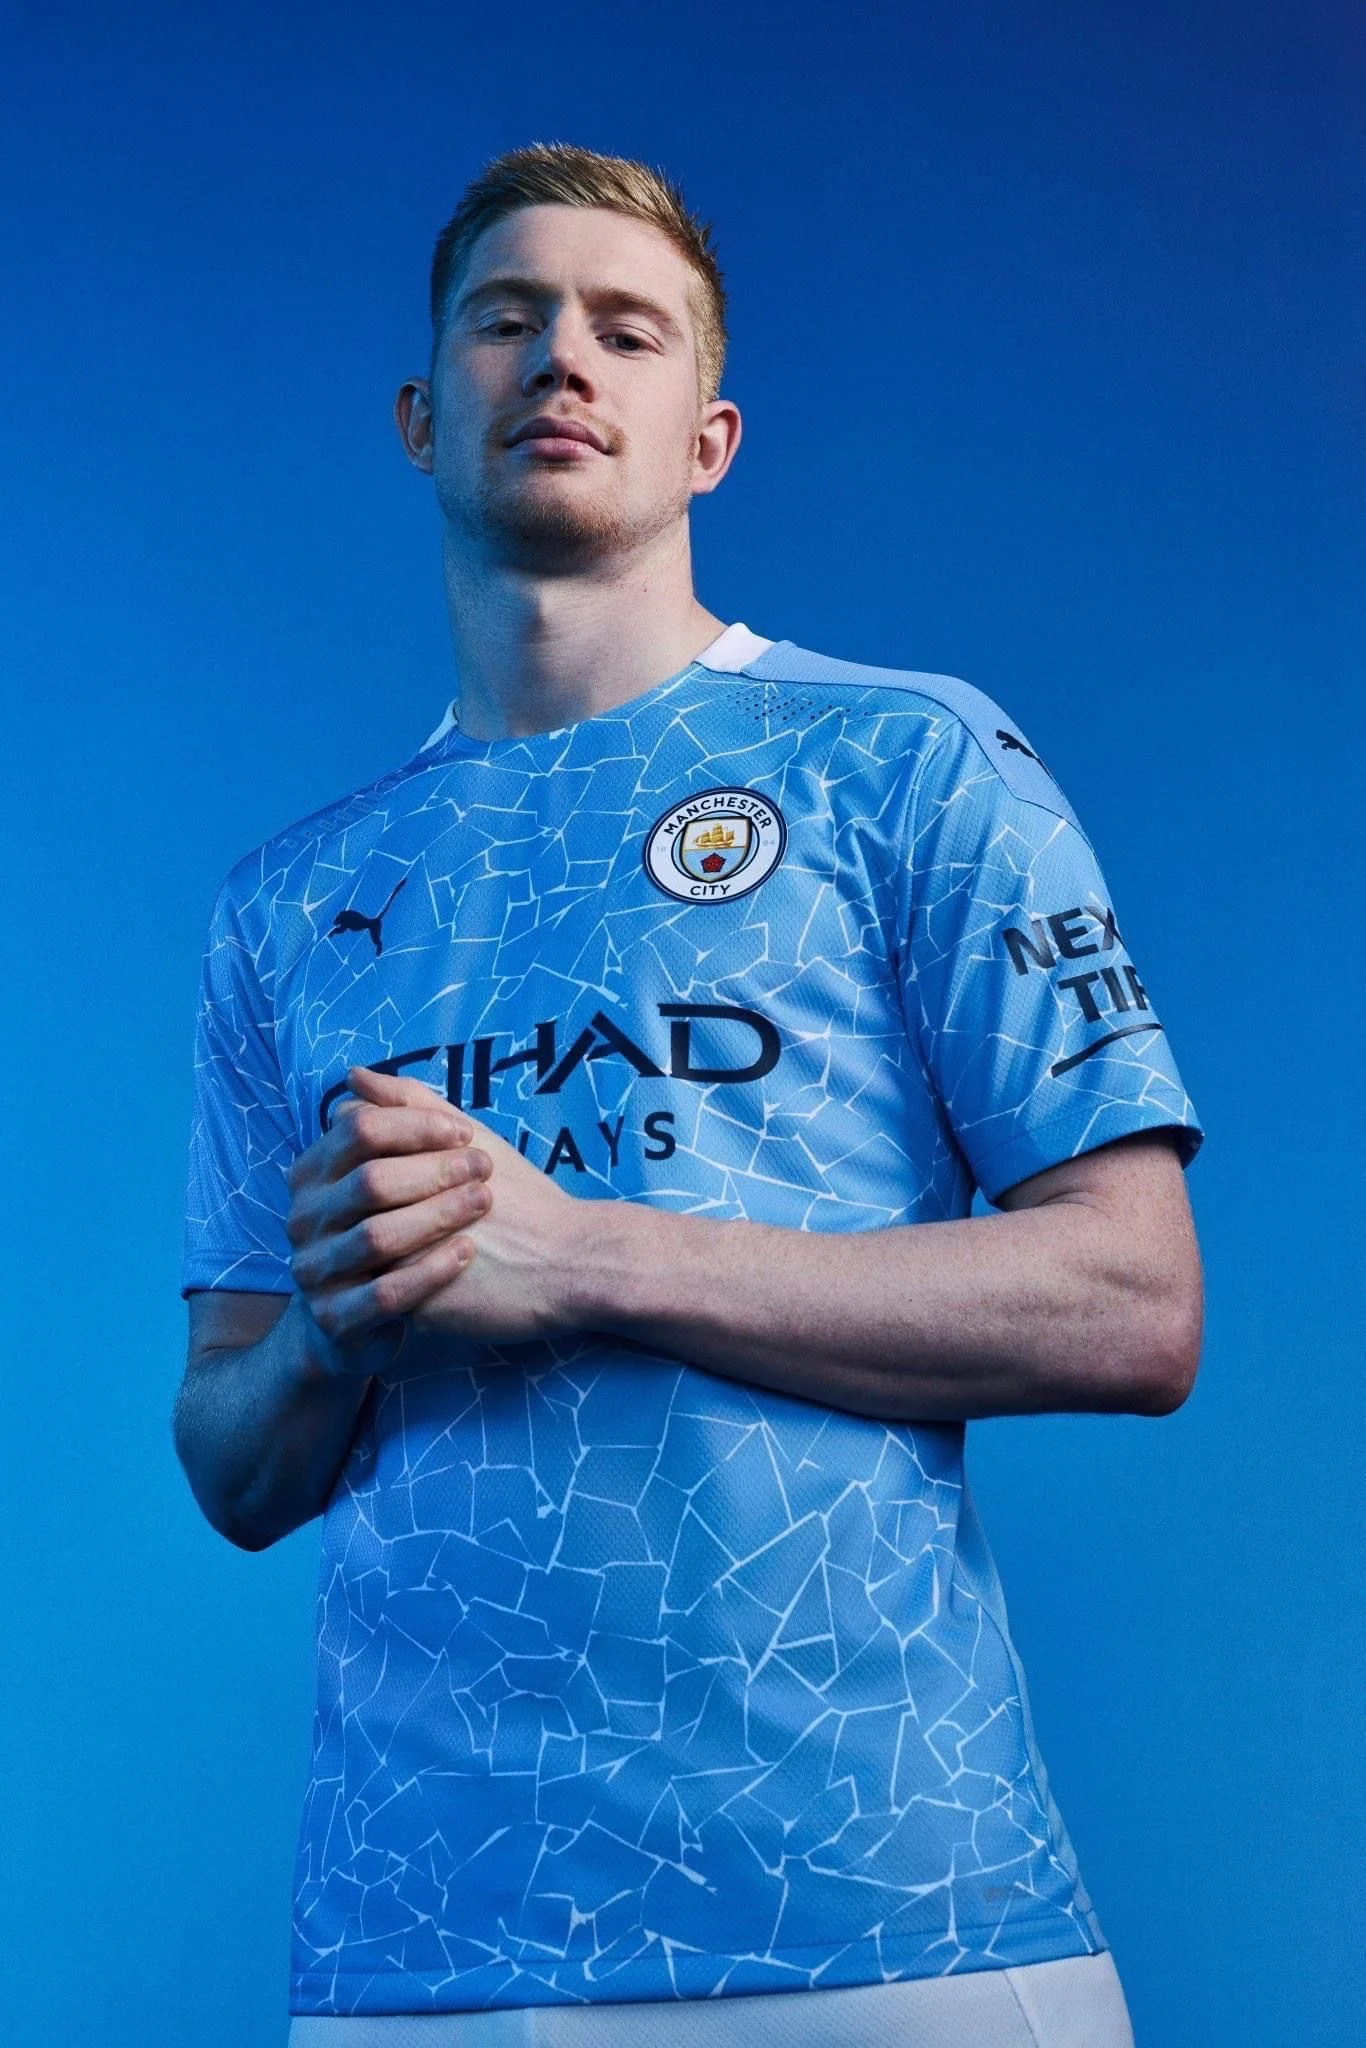 De Bruyne 2021 wallpapers, Top free backgrounds, 1370x2050 HD Phone